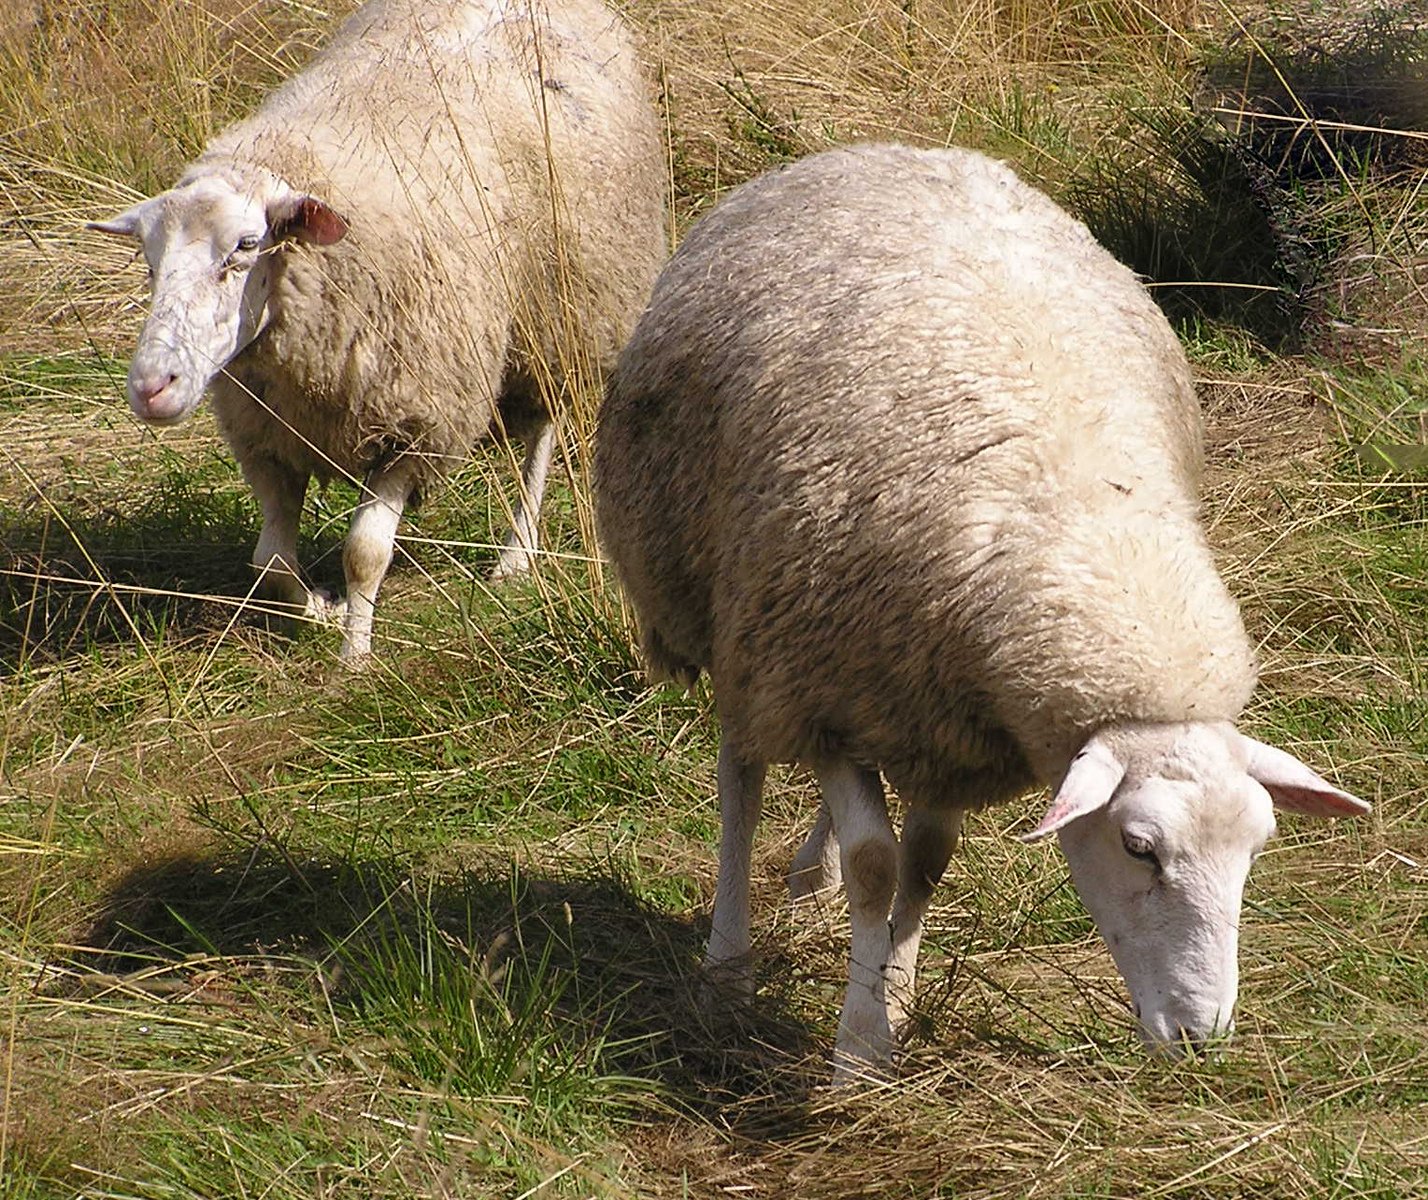 two sheep graze together on a grass covered field